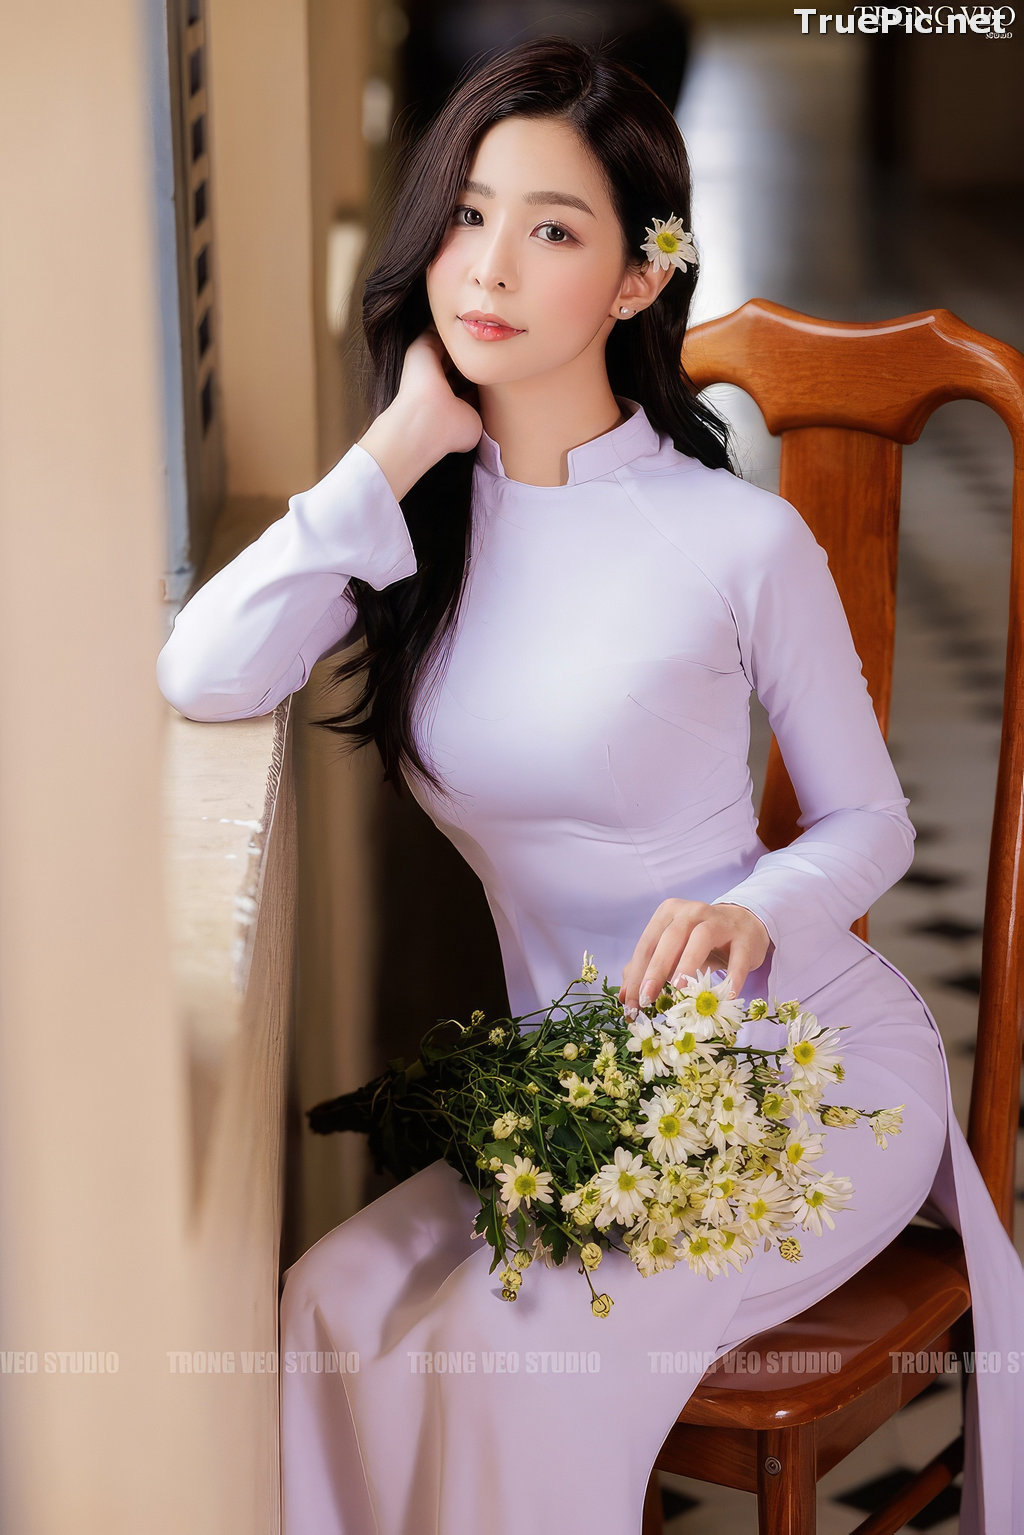 Image Vietnamese Model - Beautiful Girl and Daisy Flower - TruePic.net (129 pictures) - Picture-51